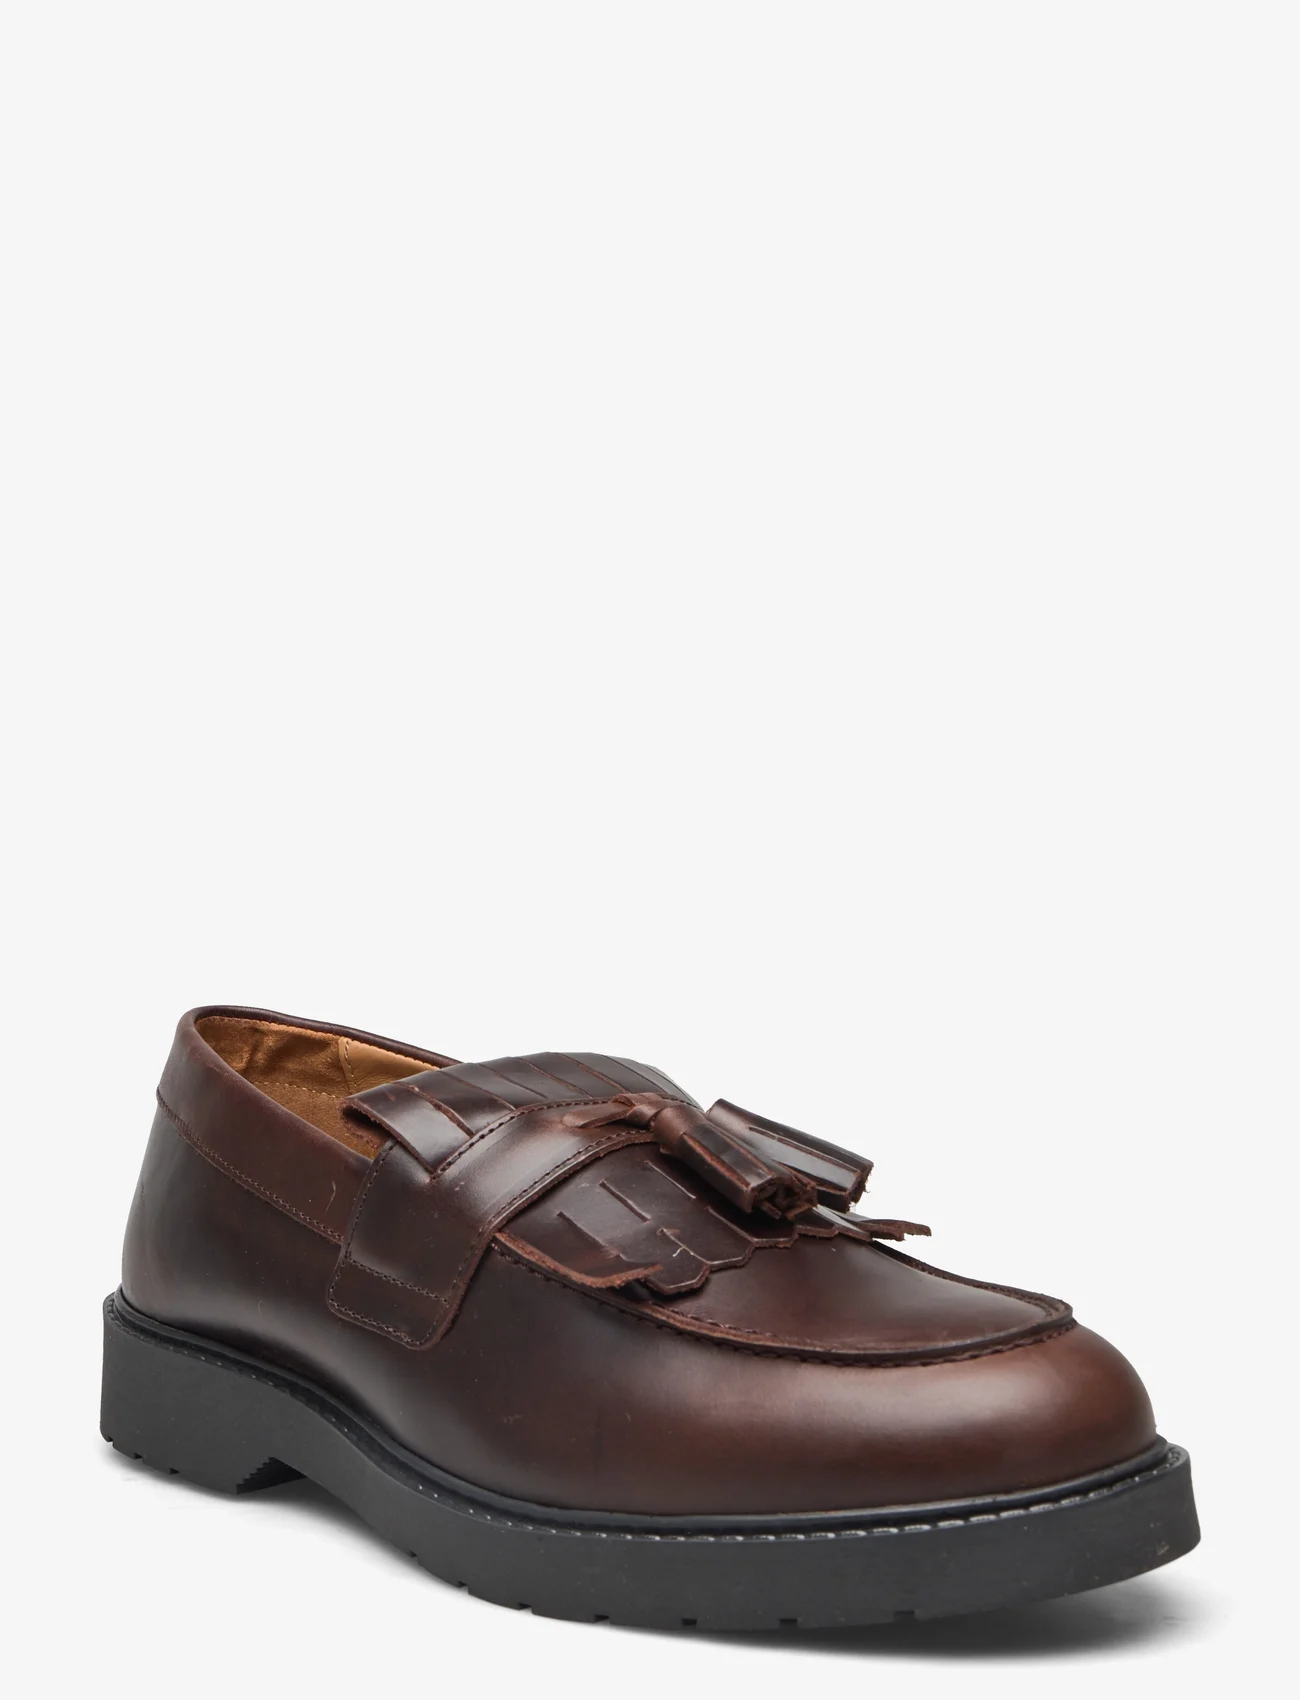 Selected Homme - SLHTIM LEATHER KILTIE LOAFER B - buty wiosenne - demitasse - 0